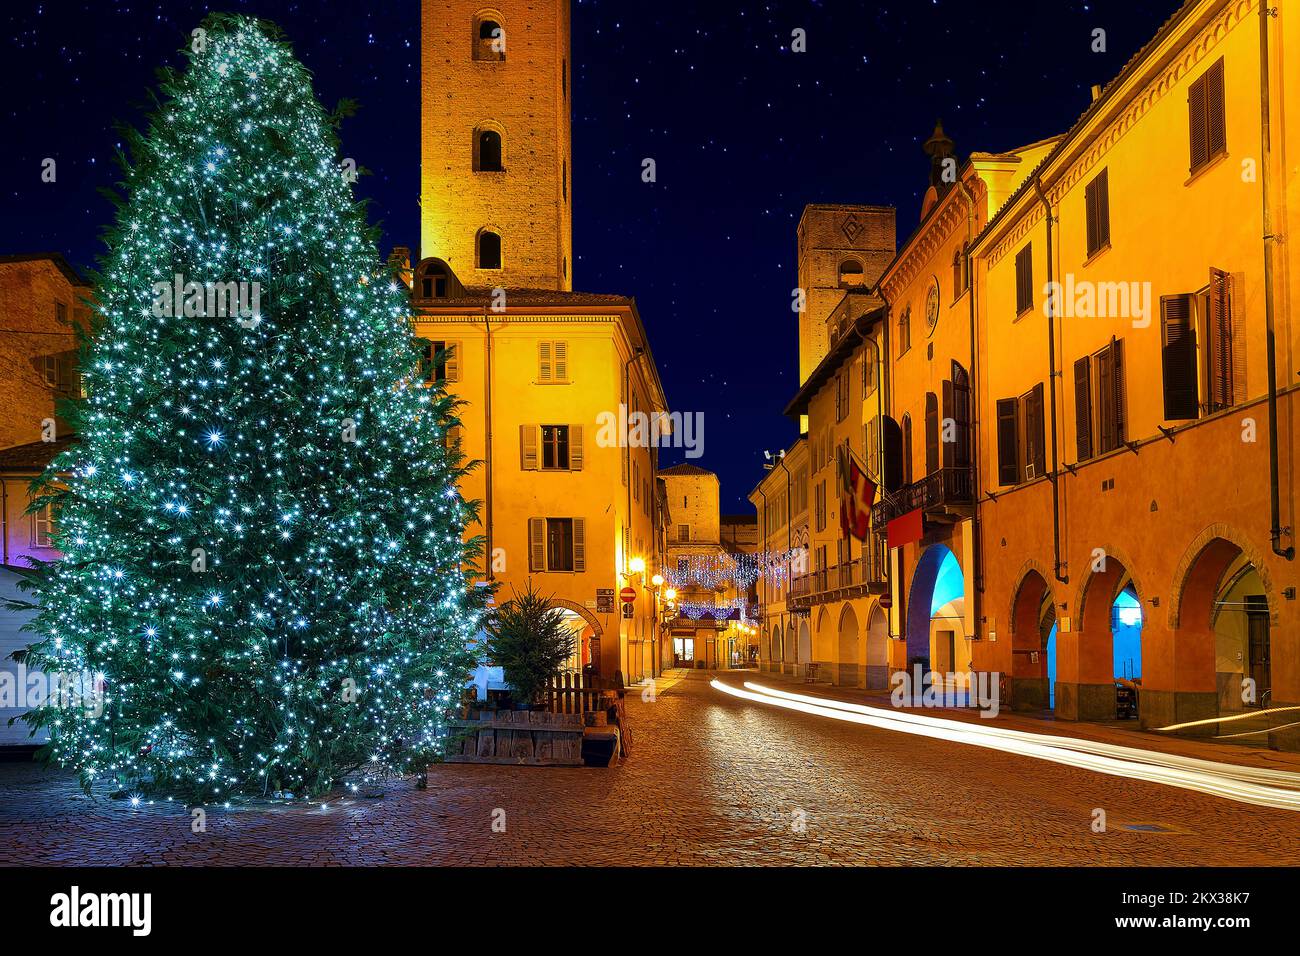 Illuminated Christmas tree on city central square in town of Alba, Italy. Stock Photo